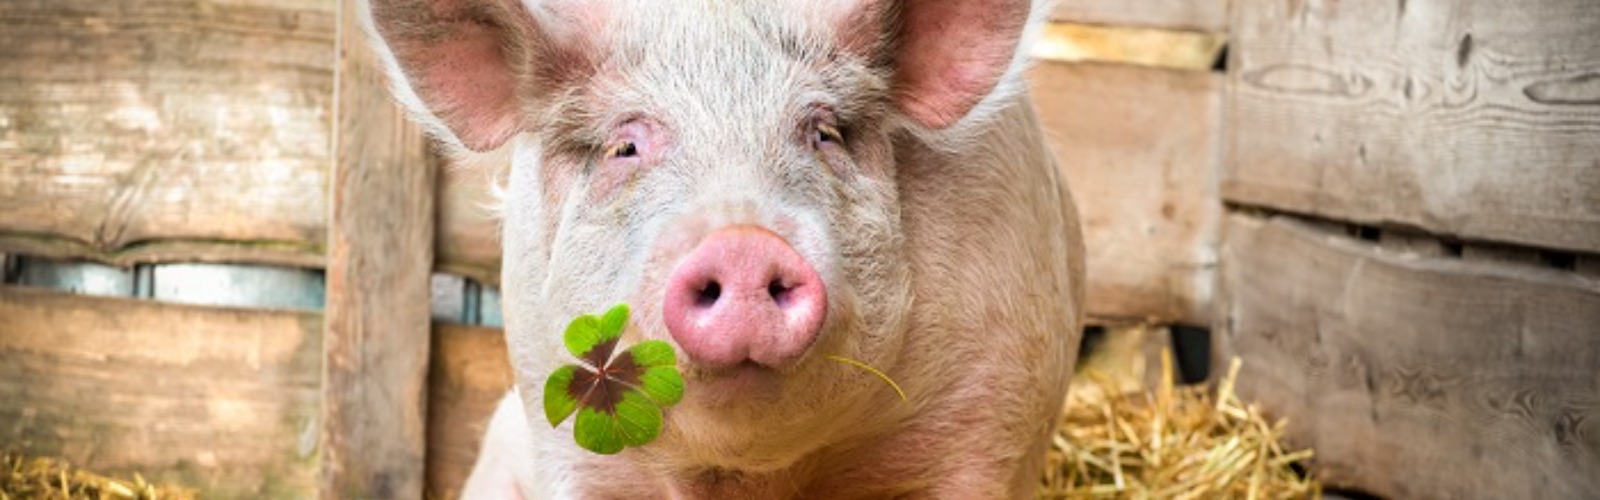 pig with a clover in its mouth